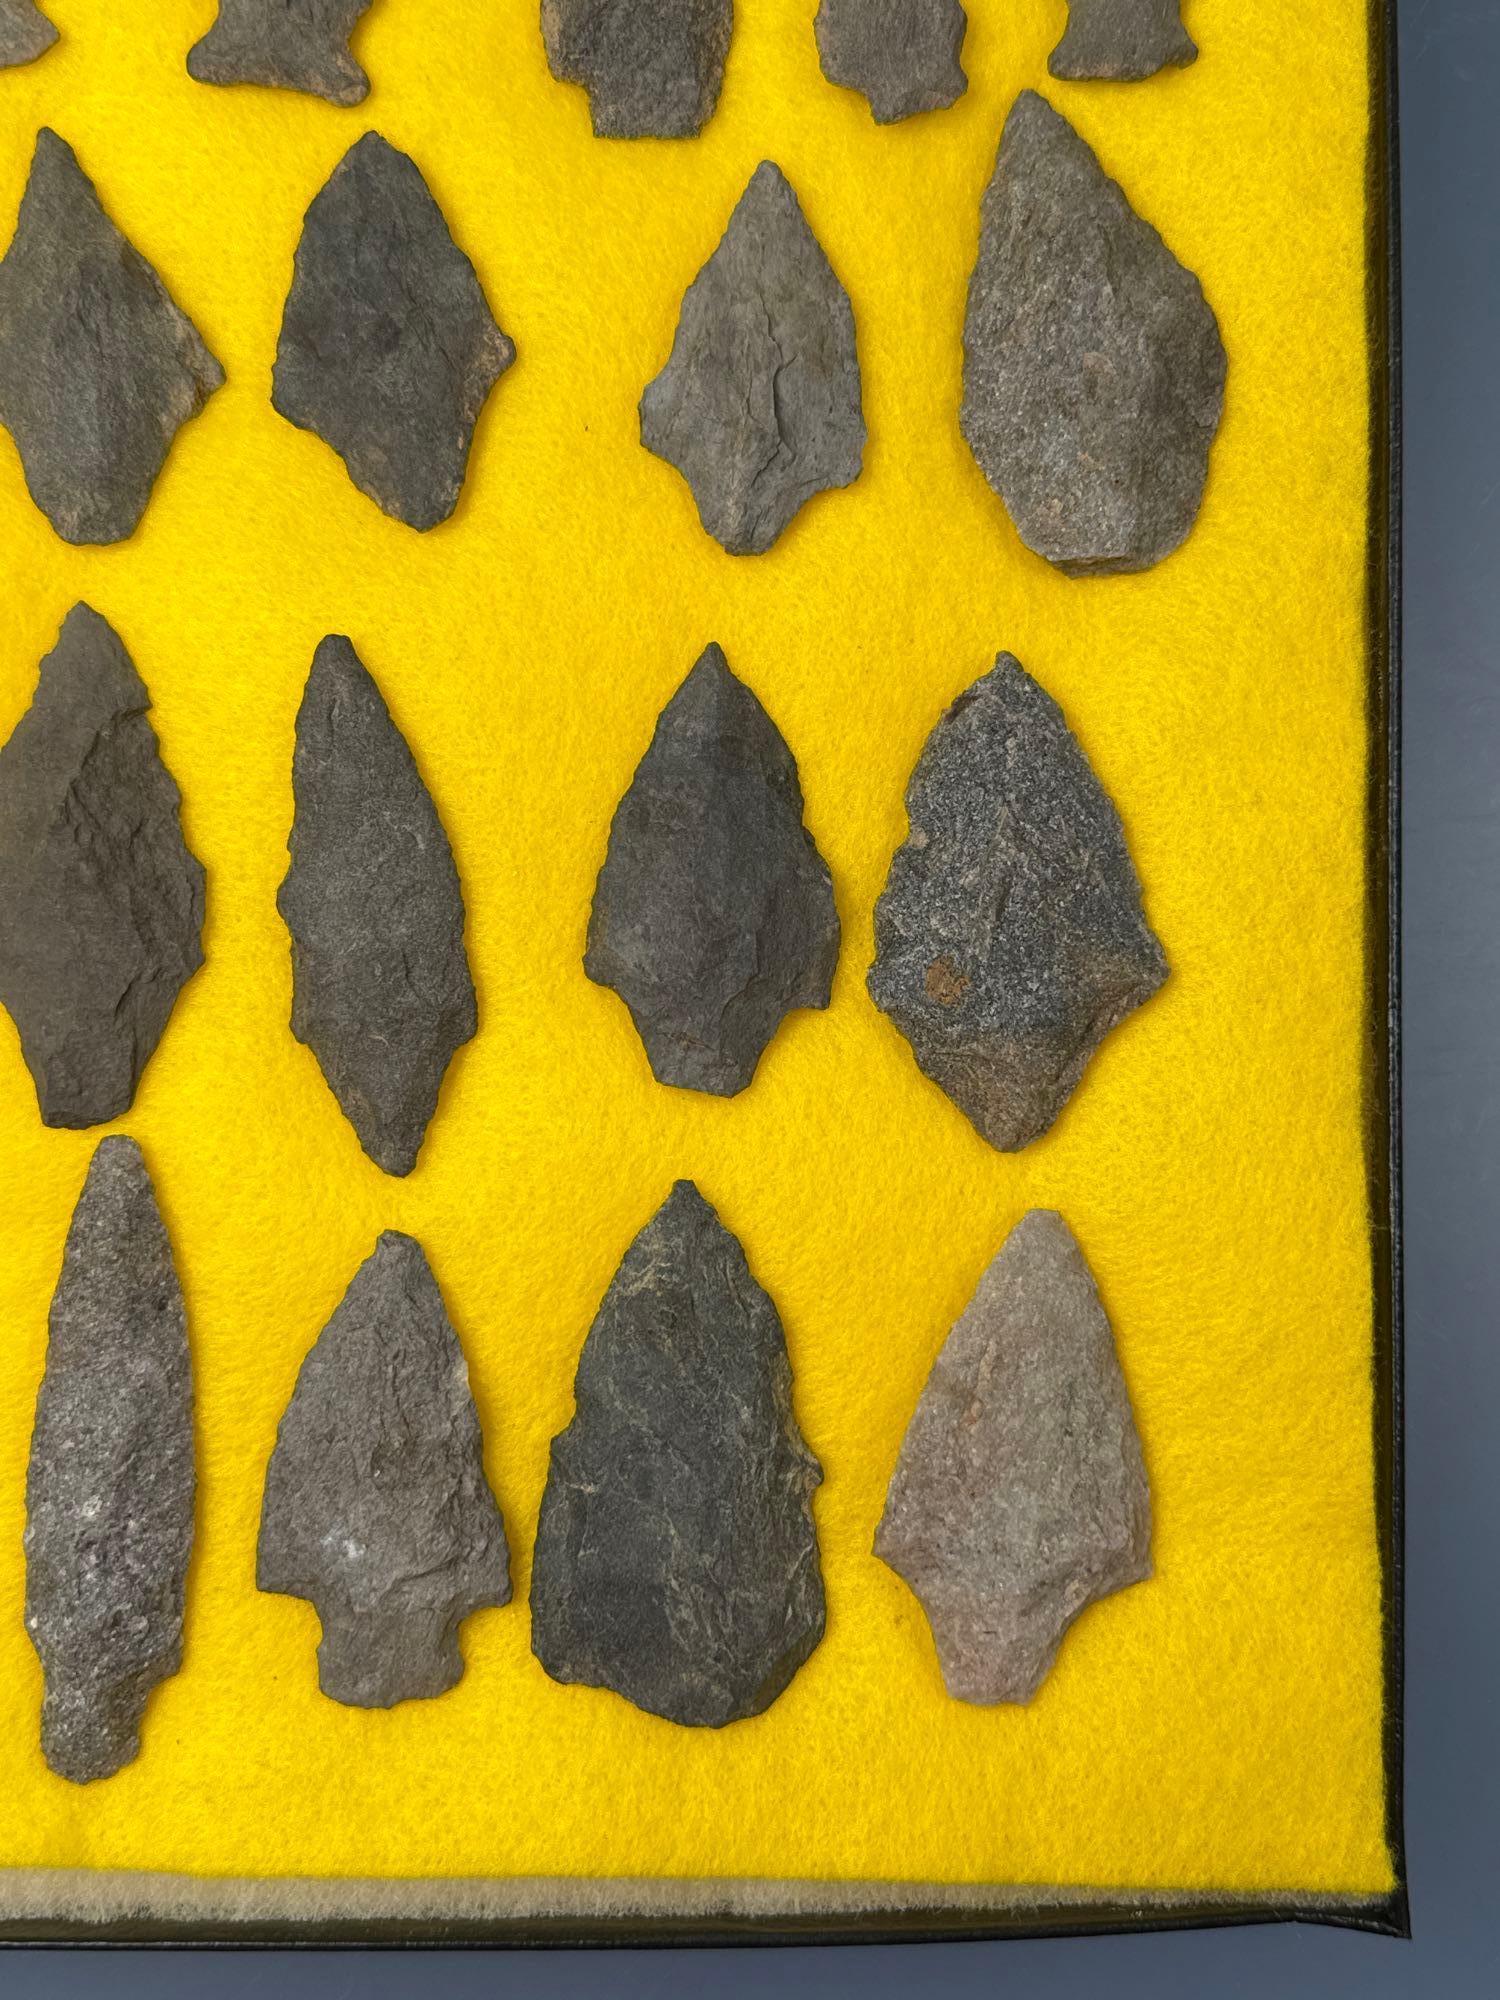 Lot of 41 Various Points, Mainly Carbon Co., Chert, Found in Jim Thorpe Area in Pennsylvania, Longes